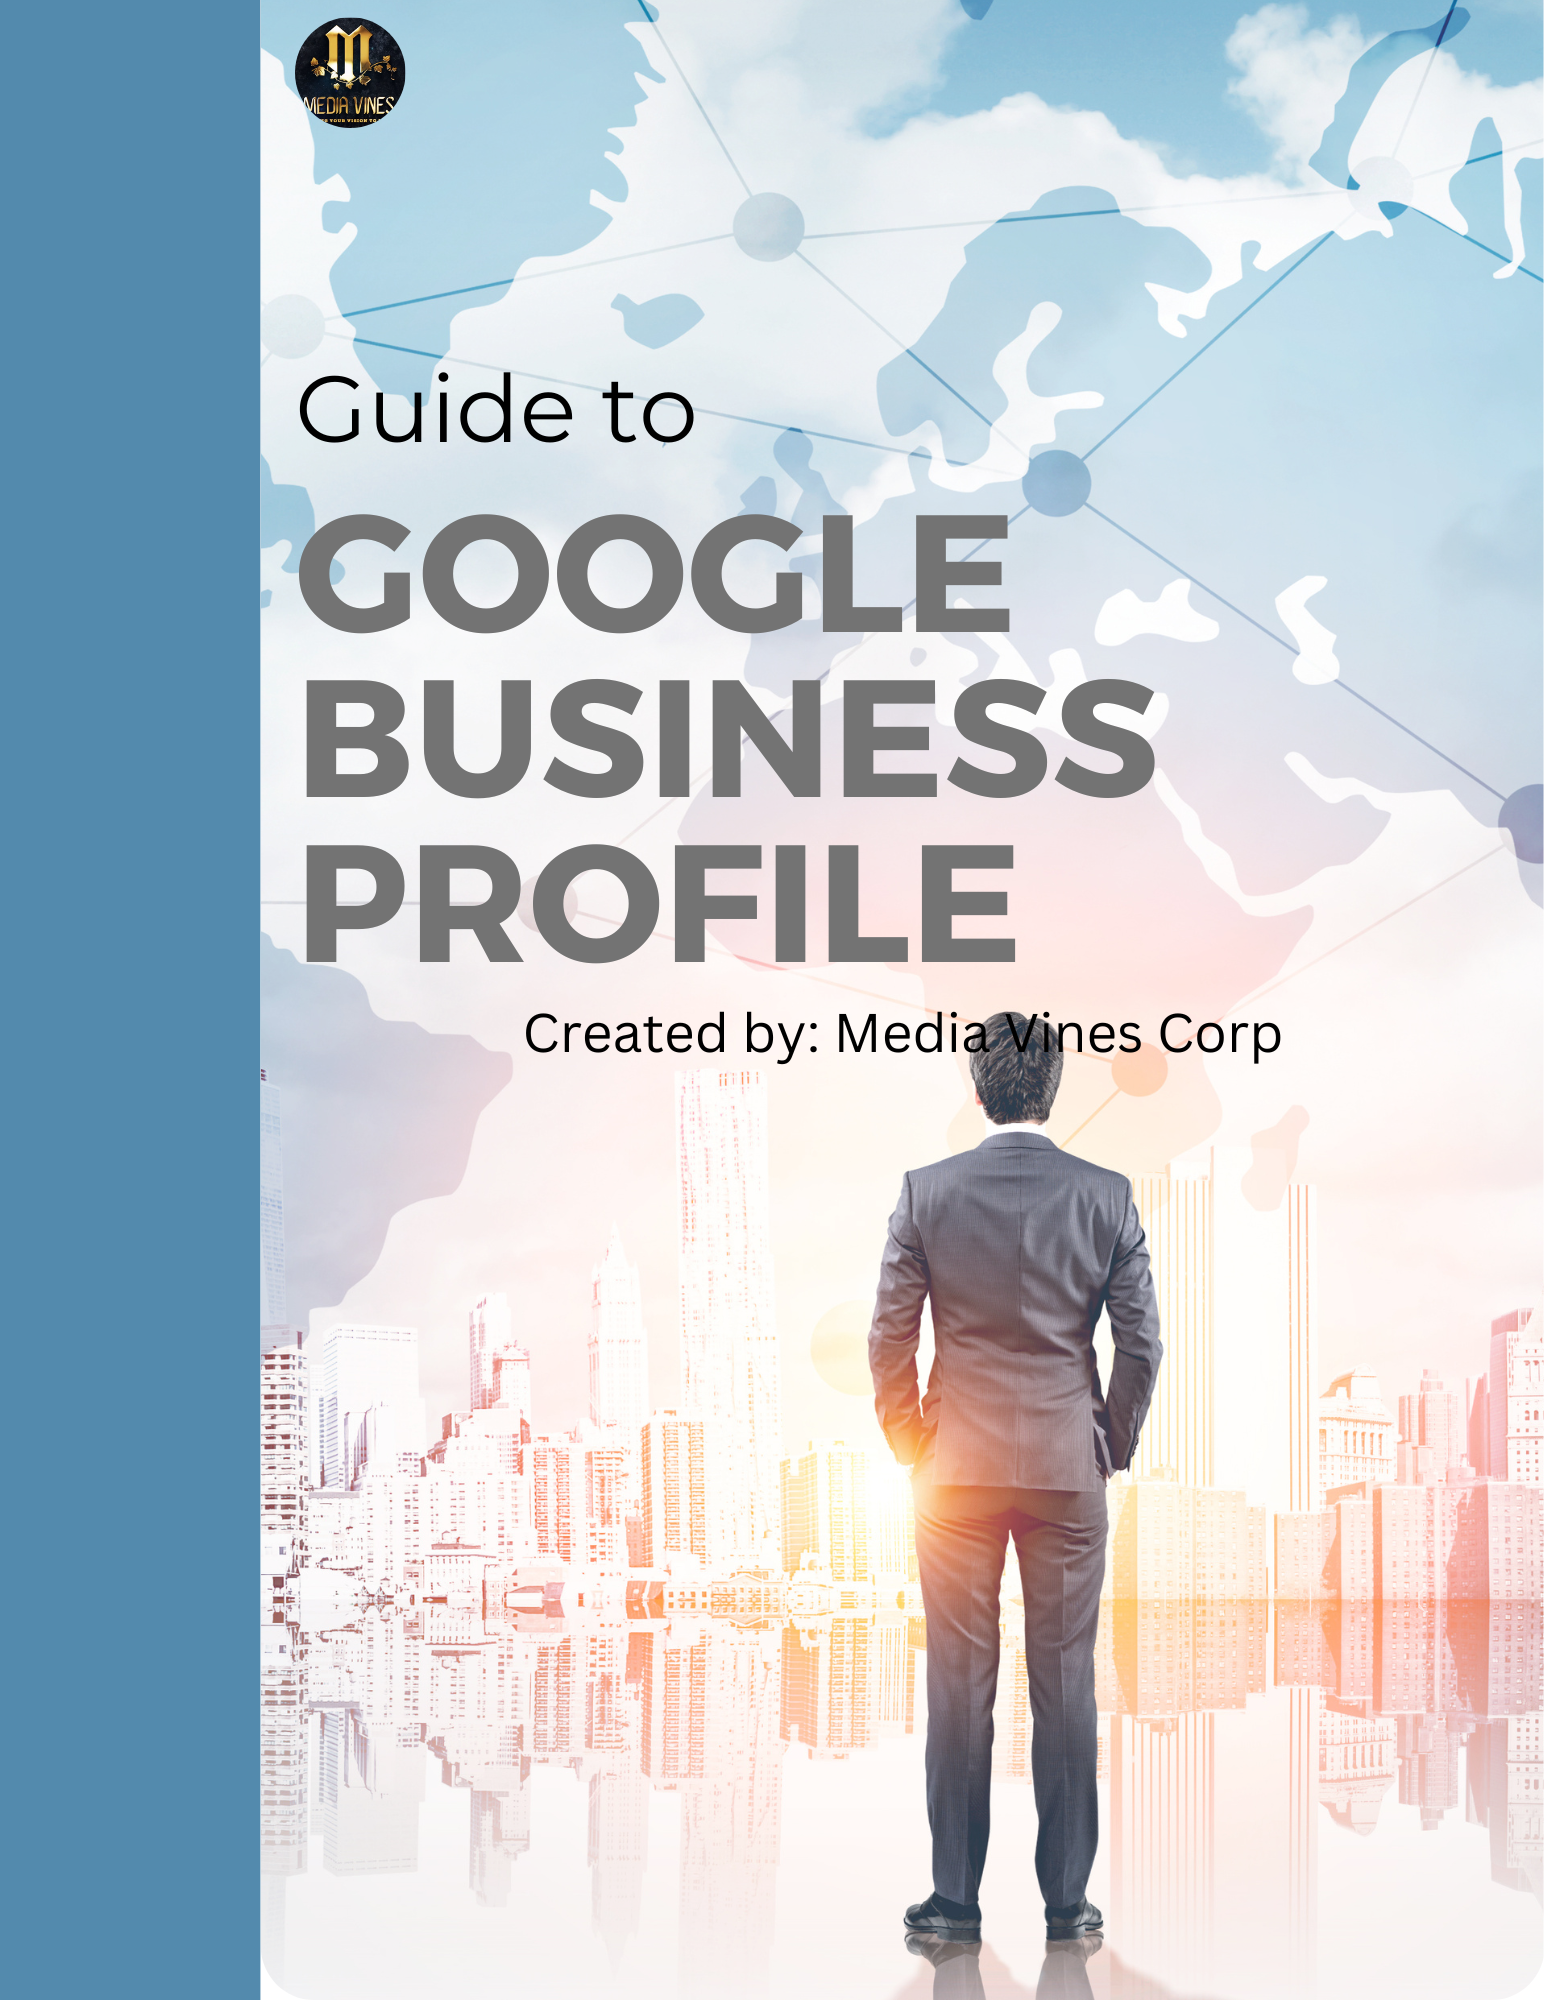 ebook Cover  for Guide to Google Business Profile (GBP) - a DIY ebook for small business to get listed on GBP by Media Vines Corp of Kihei, HI